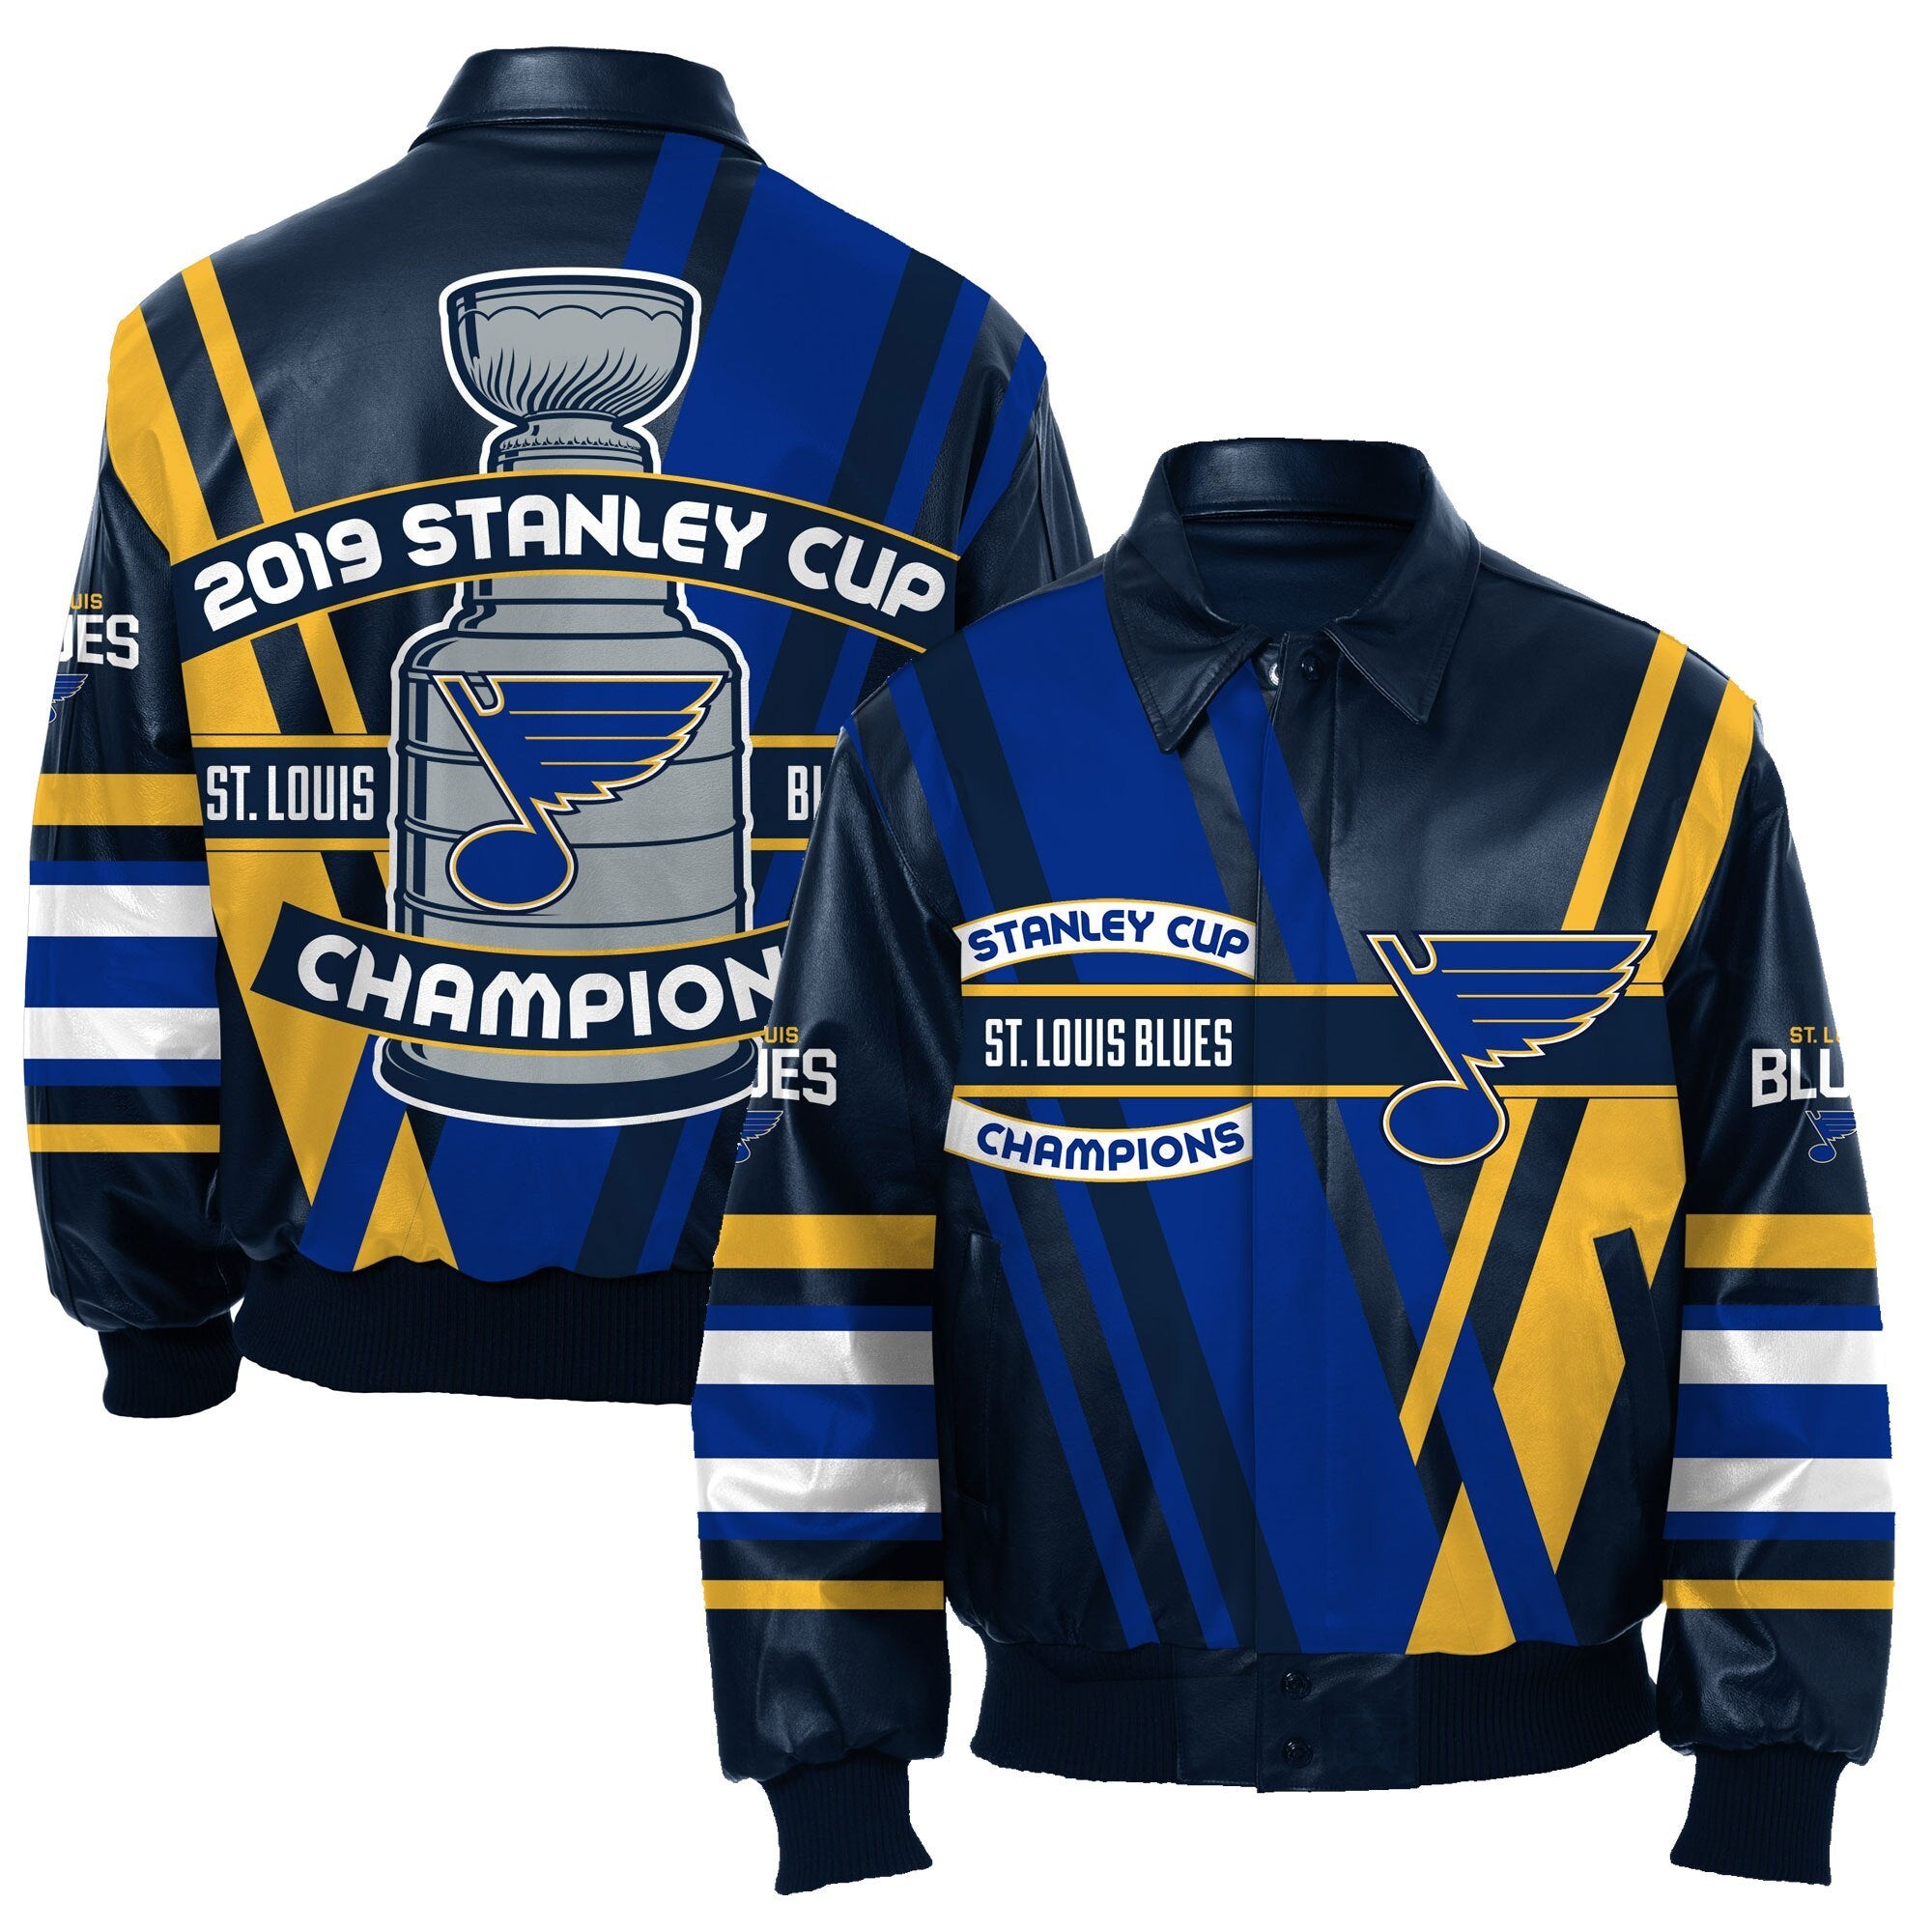 St. Louis Blues JH Design 2019 Stanley Cup Champions Nappa Leather Jacket -  Navy